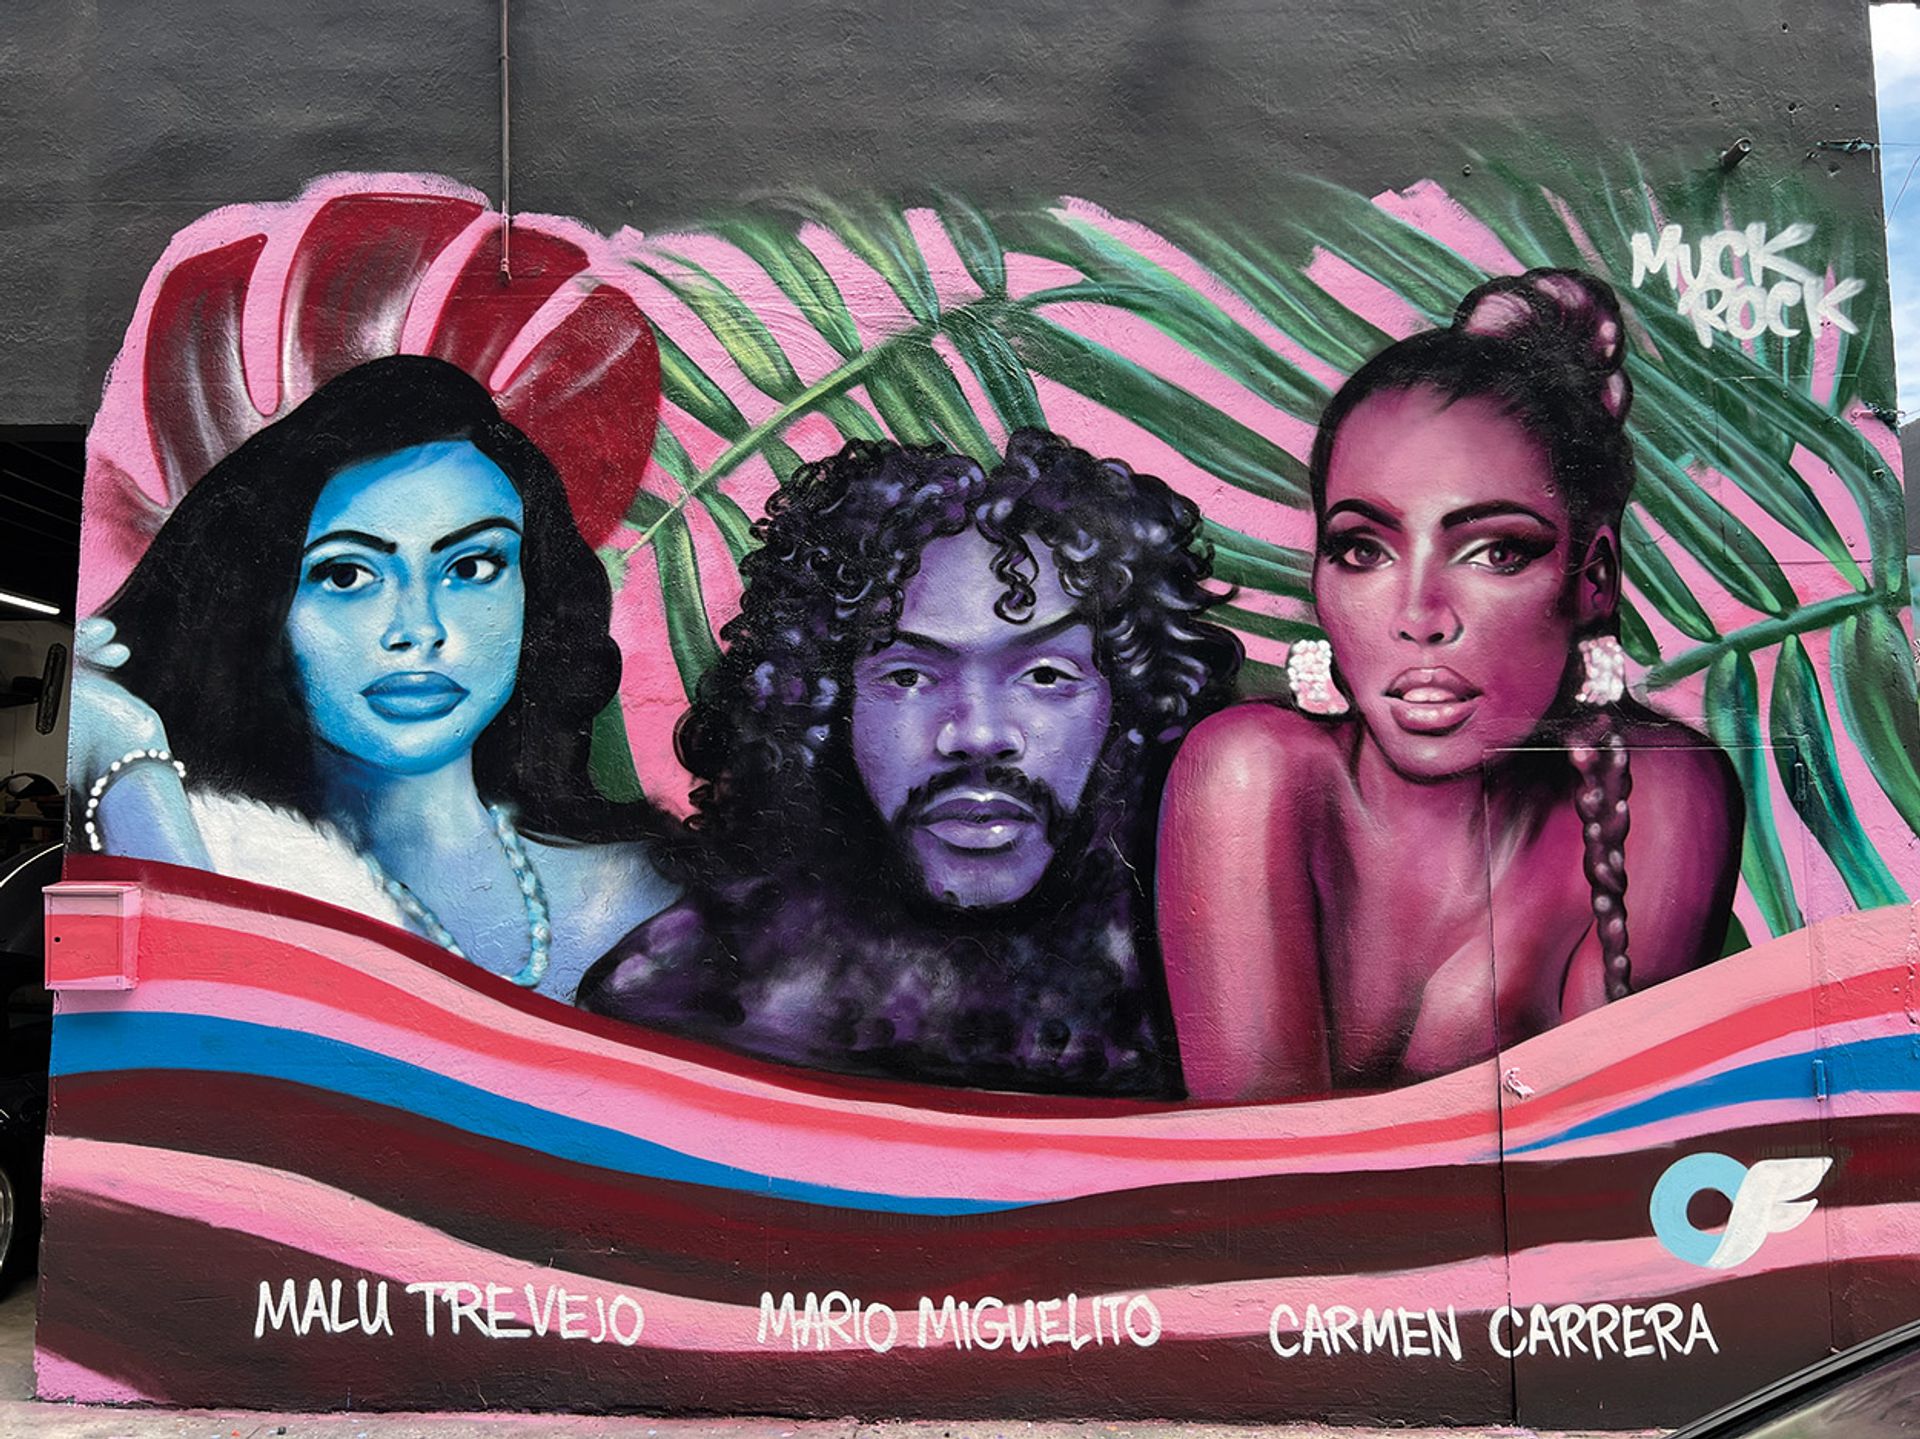 Graffiti artist Jules Muck’s mural of three OnlyFans creators was created in collaboration with the platform to promote it as a home for all kinds of creators Courtesy of Jules Muck